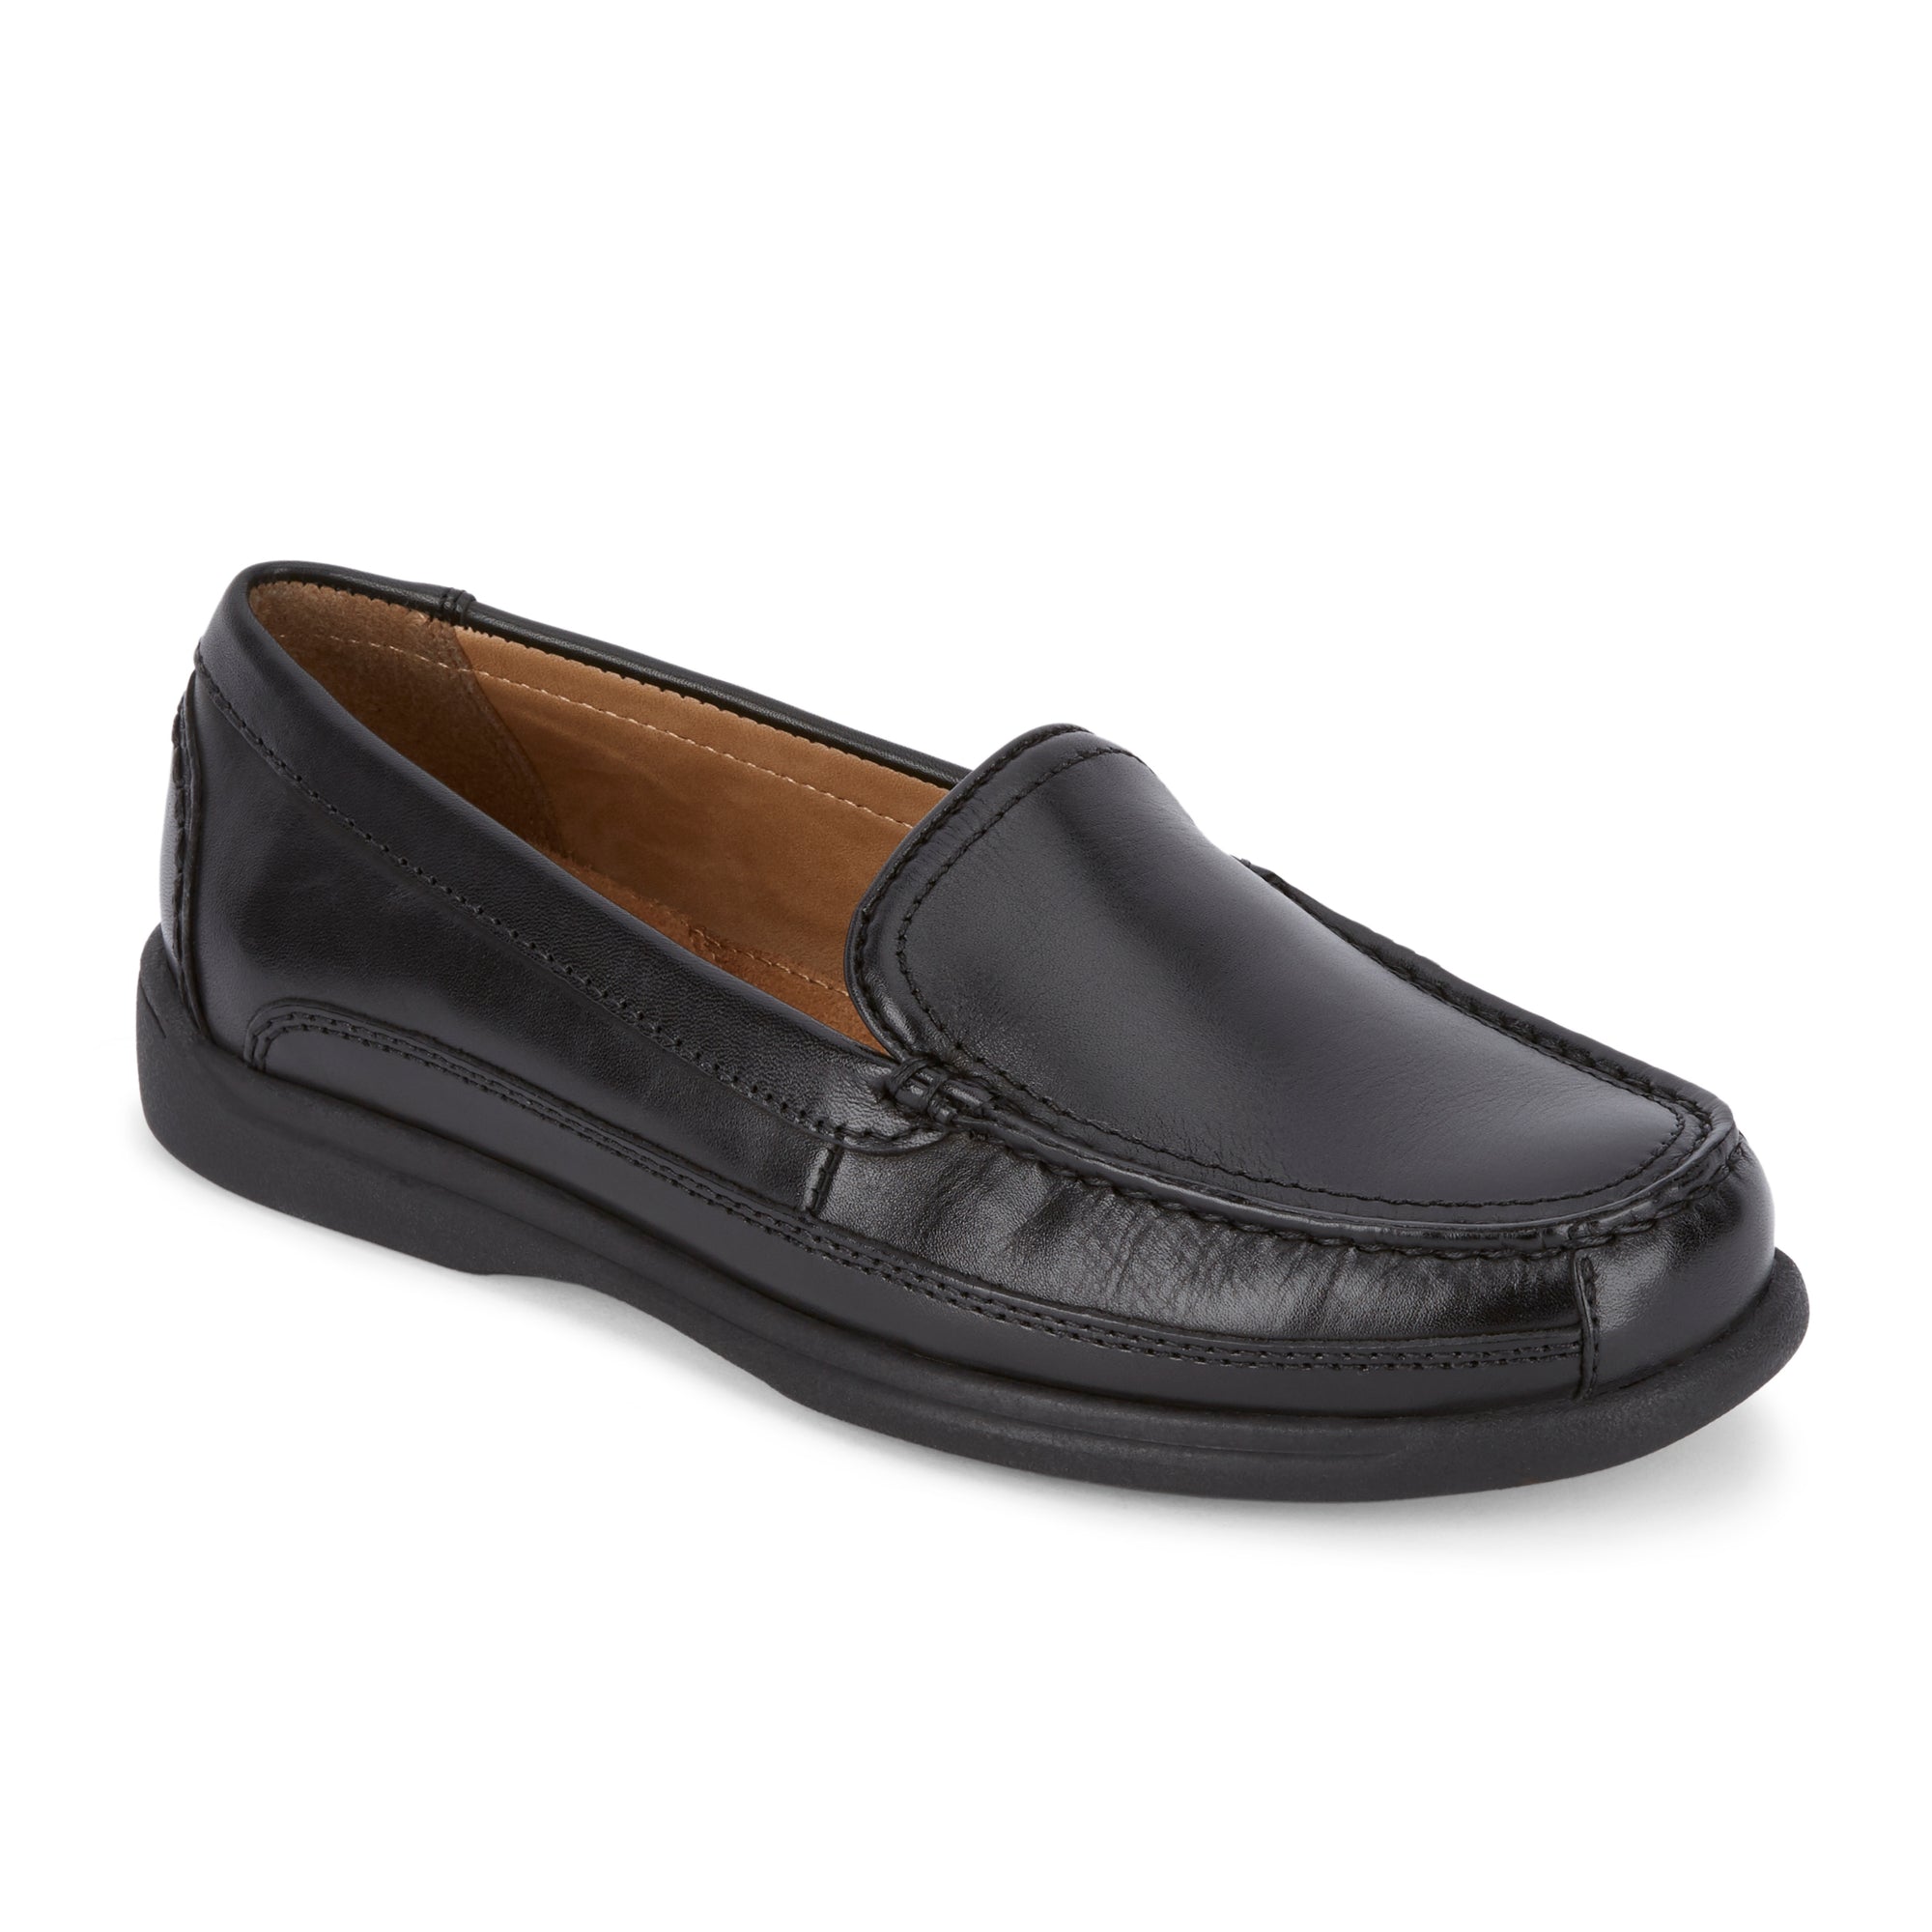 Black-Dockers Mens Catalina Leather Casual Slip-on Comfort Loafer Shoe